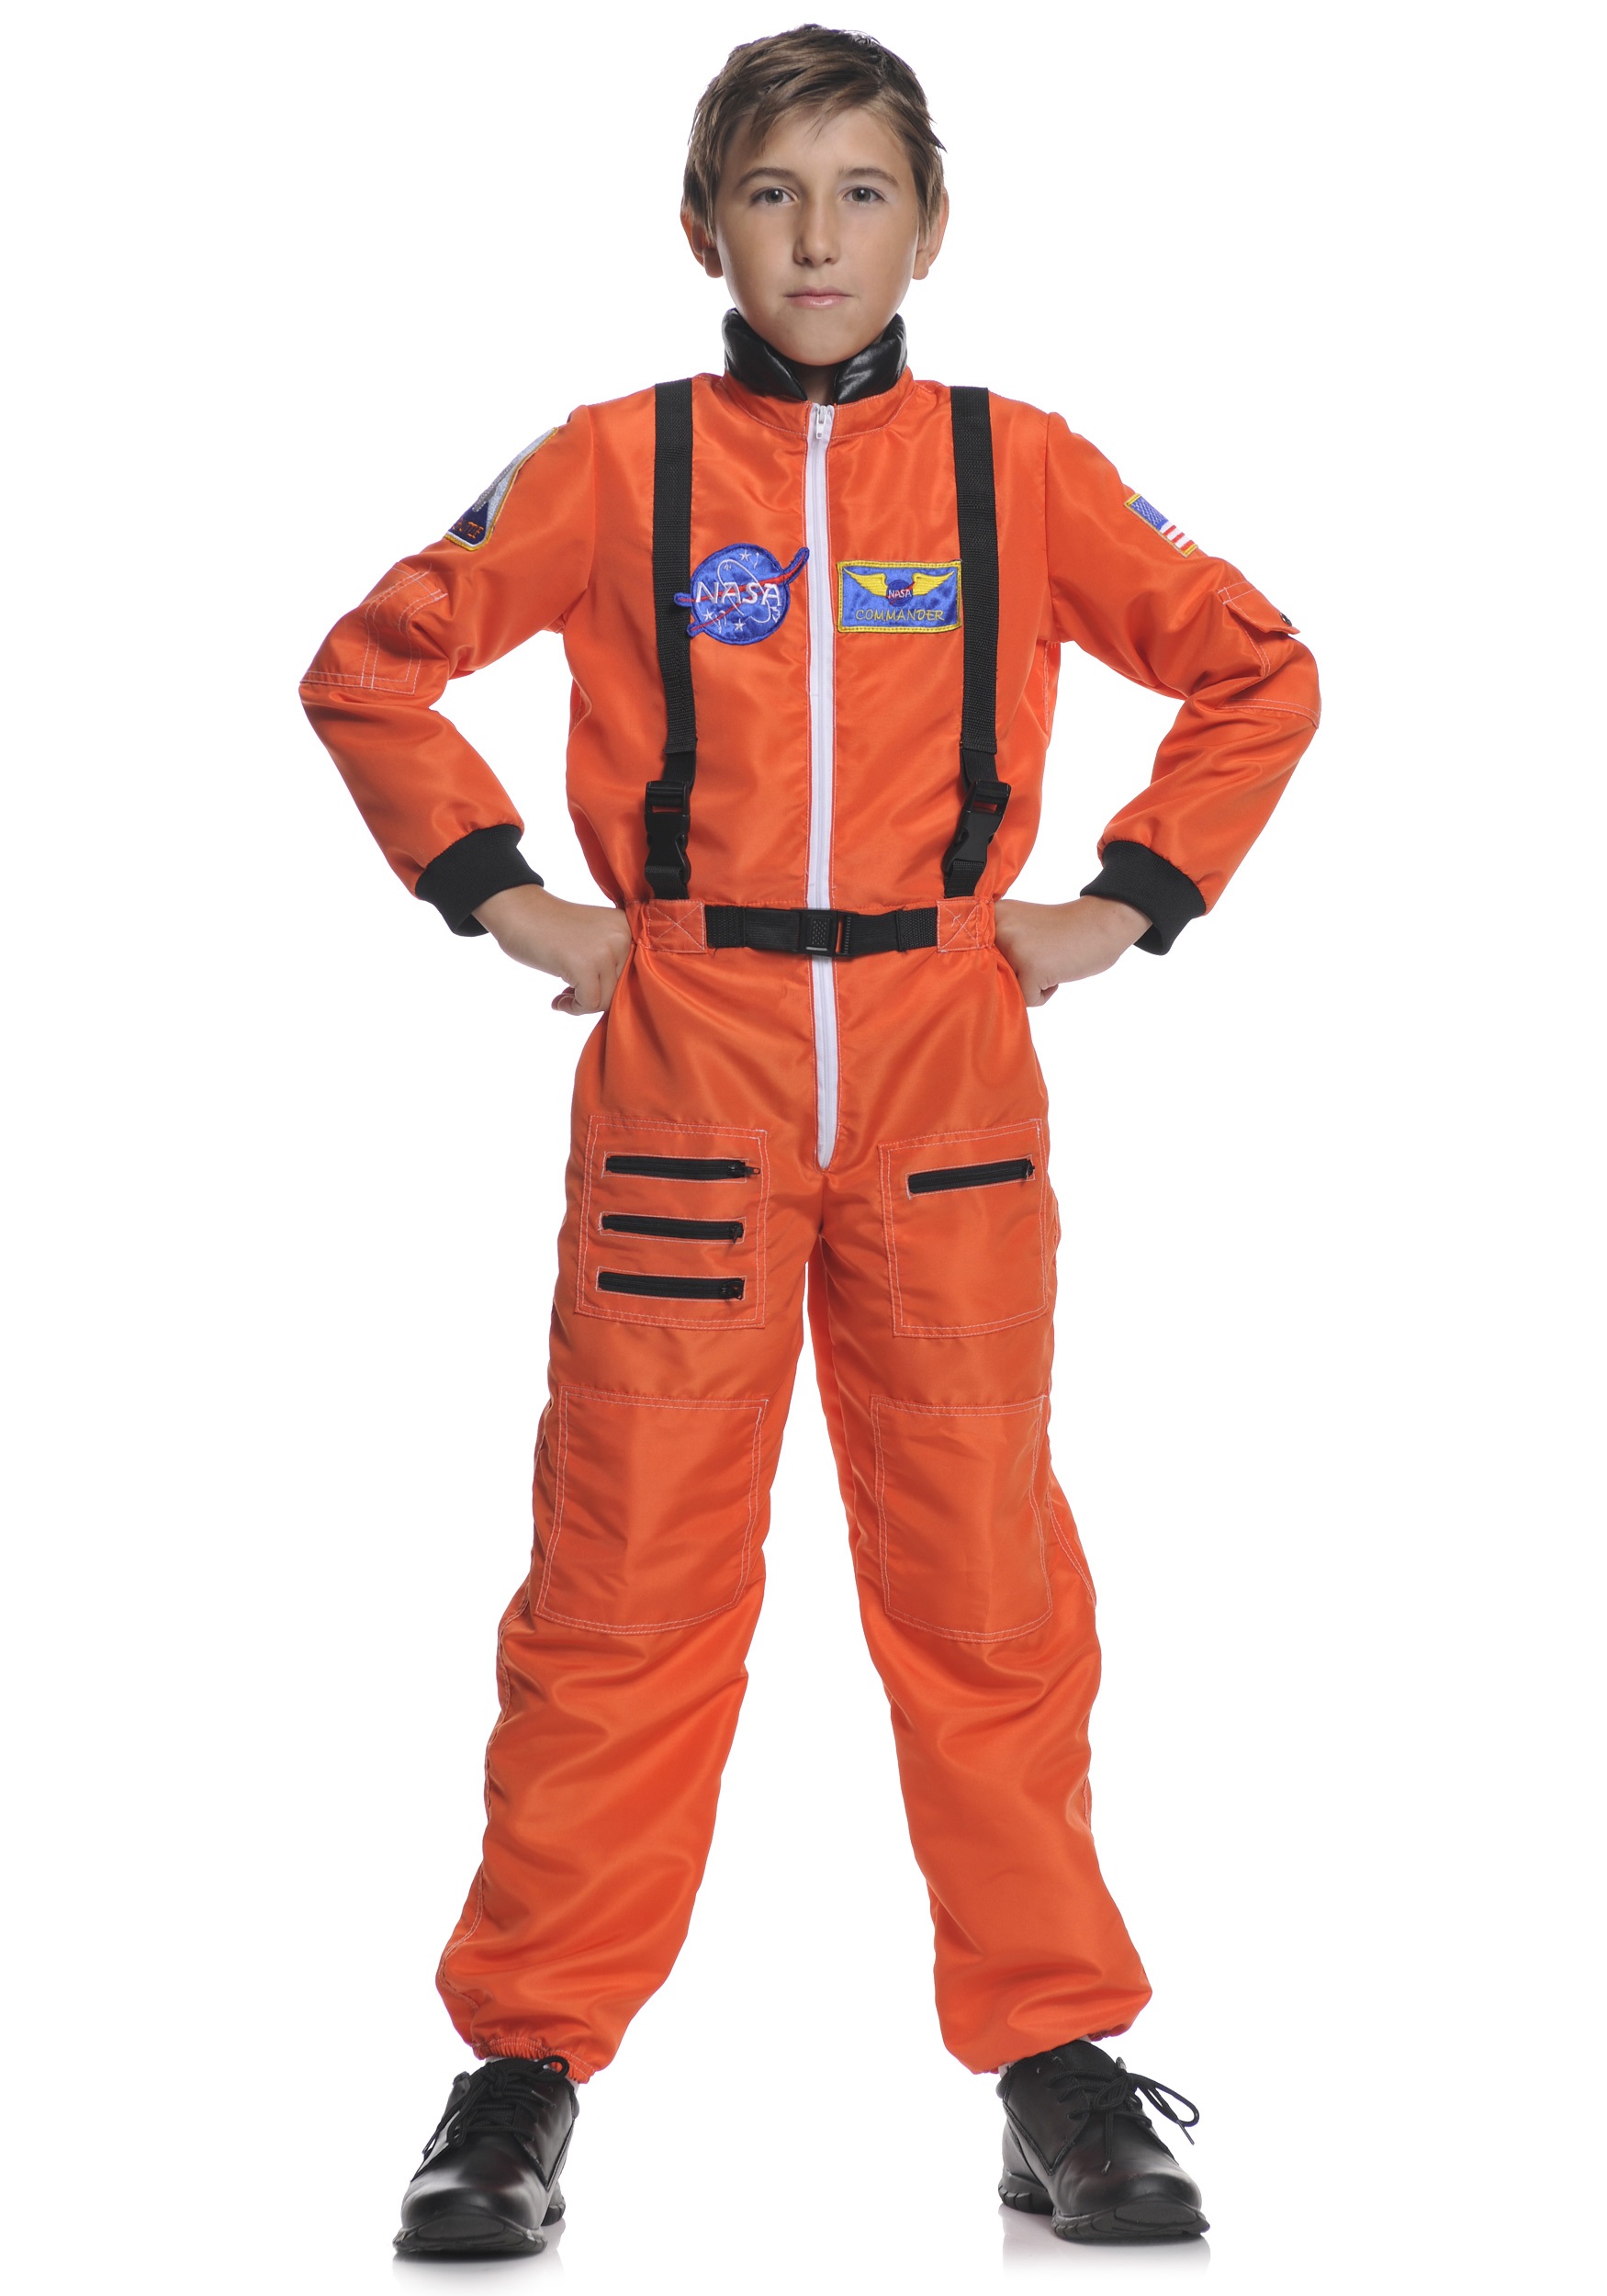 Boys Astronaut Costumes Christmas Fancy Dress for Child cosplay Space Jumpsuits